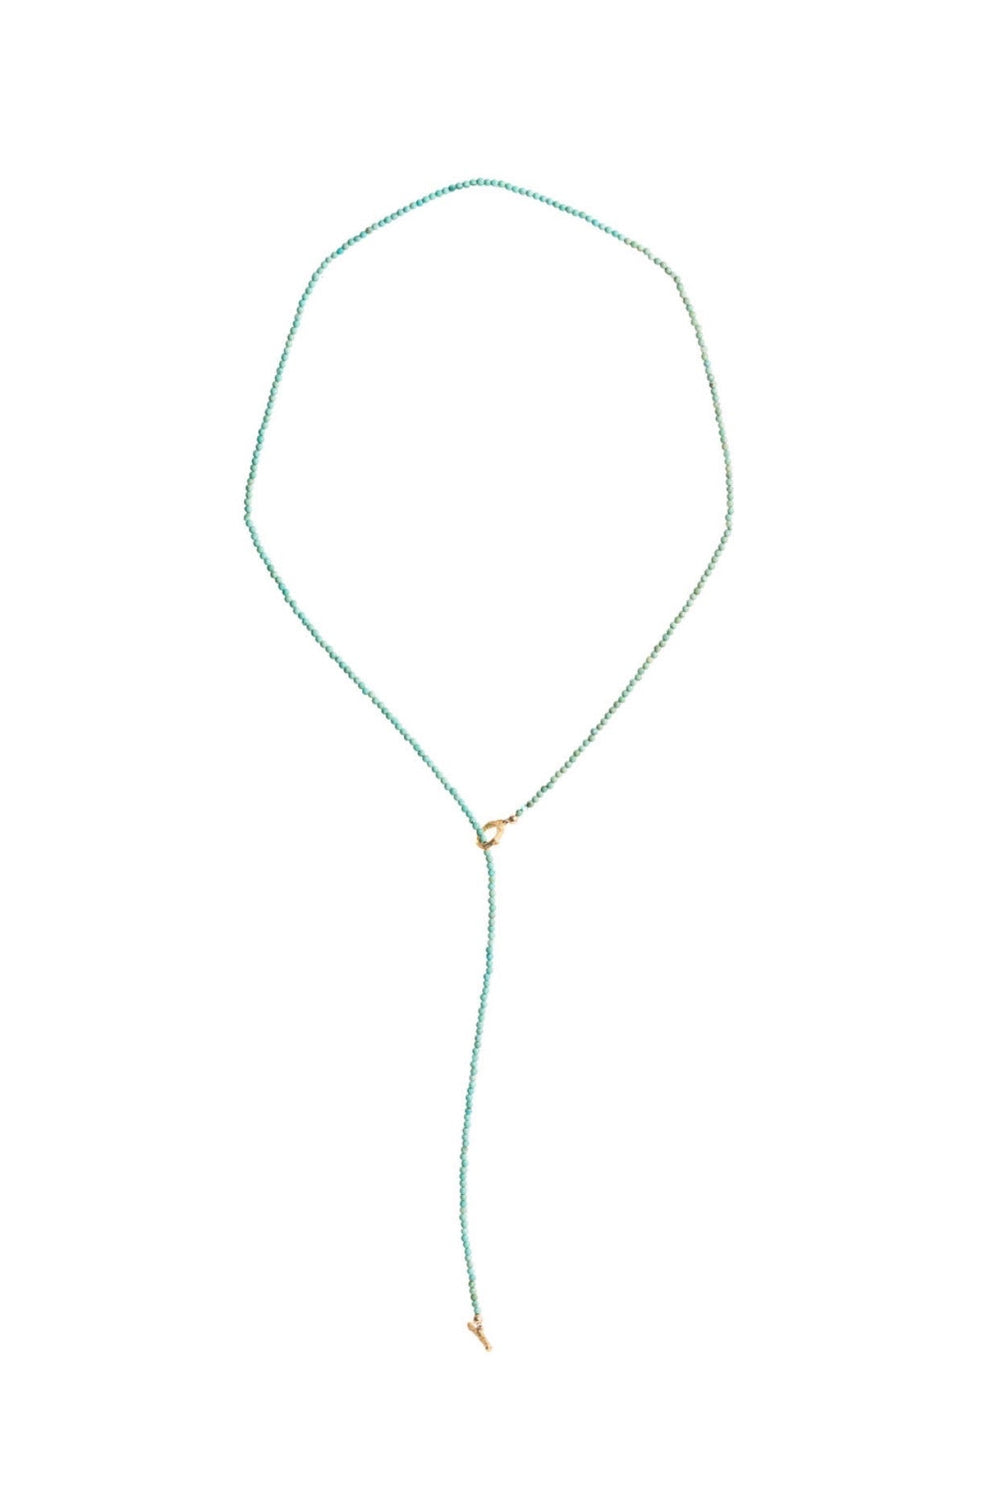 DREAM TURQUOISE NECKLACE